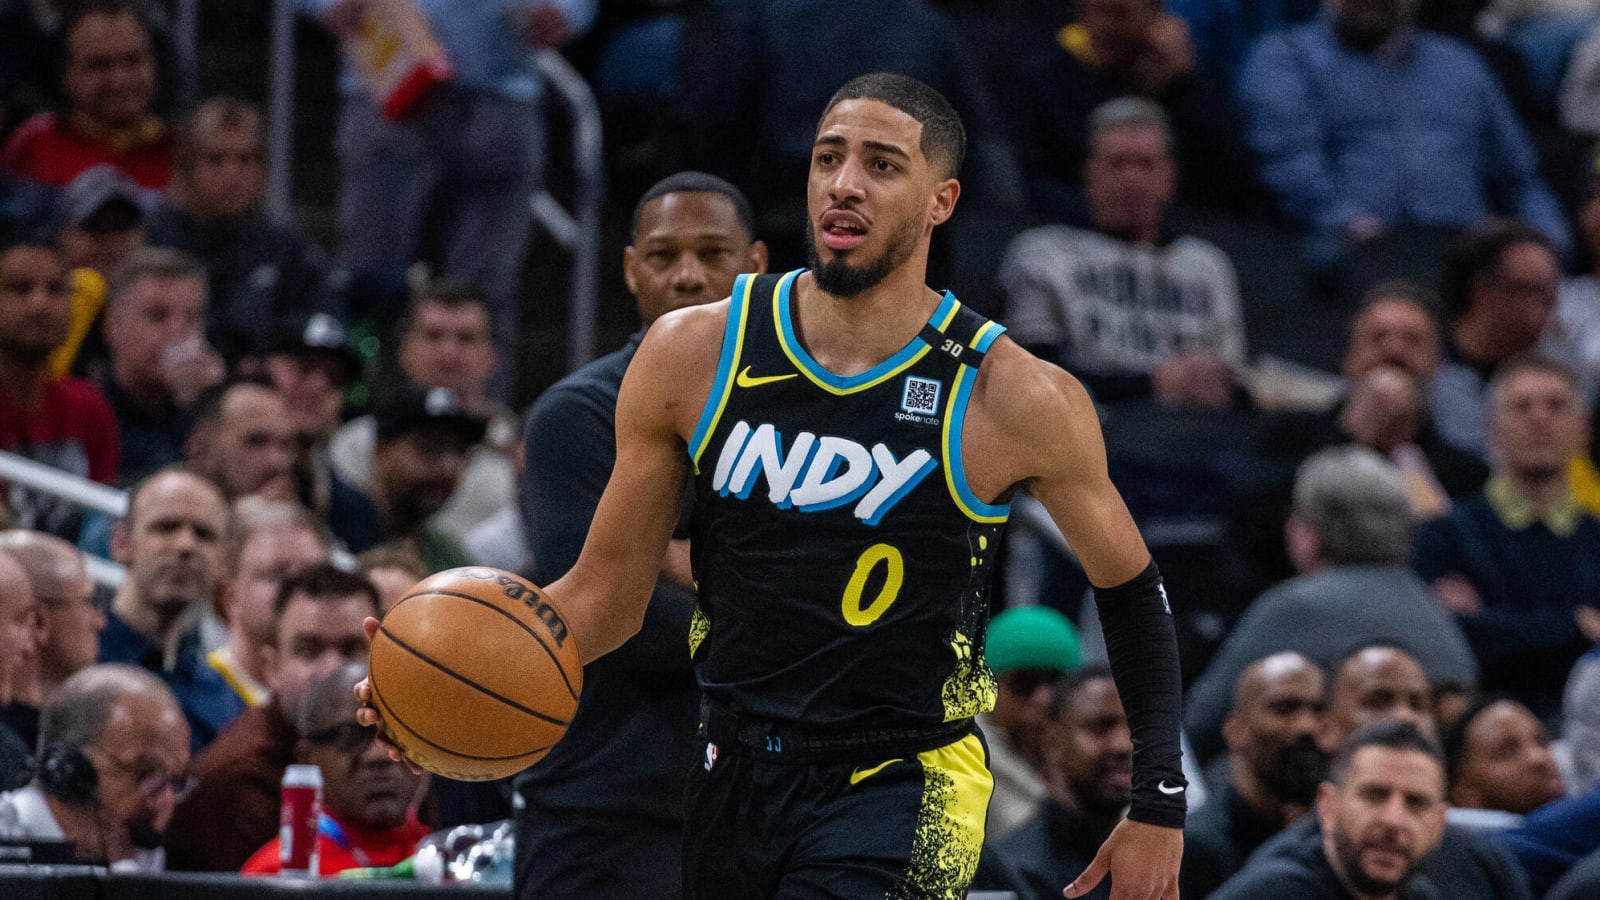 Tyrese Haliburton and other leap-year babies in sports